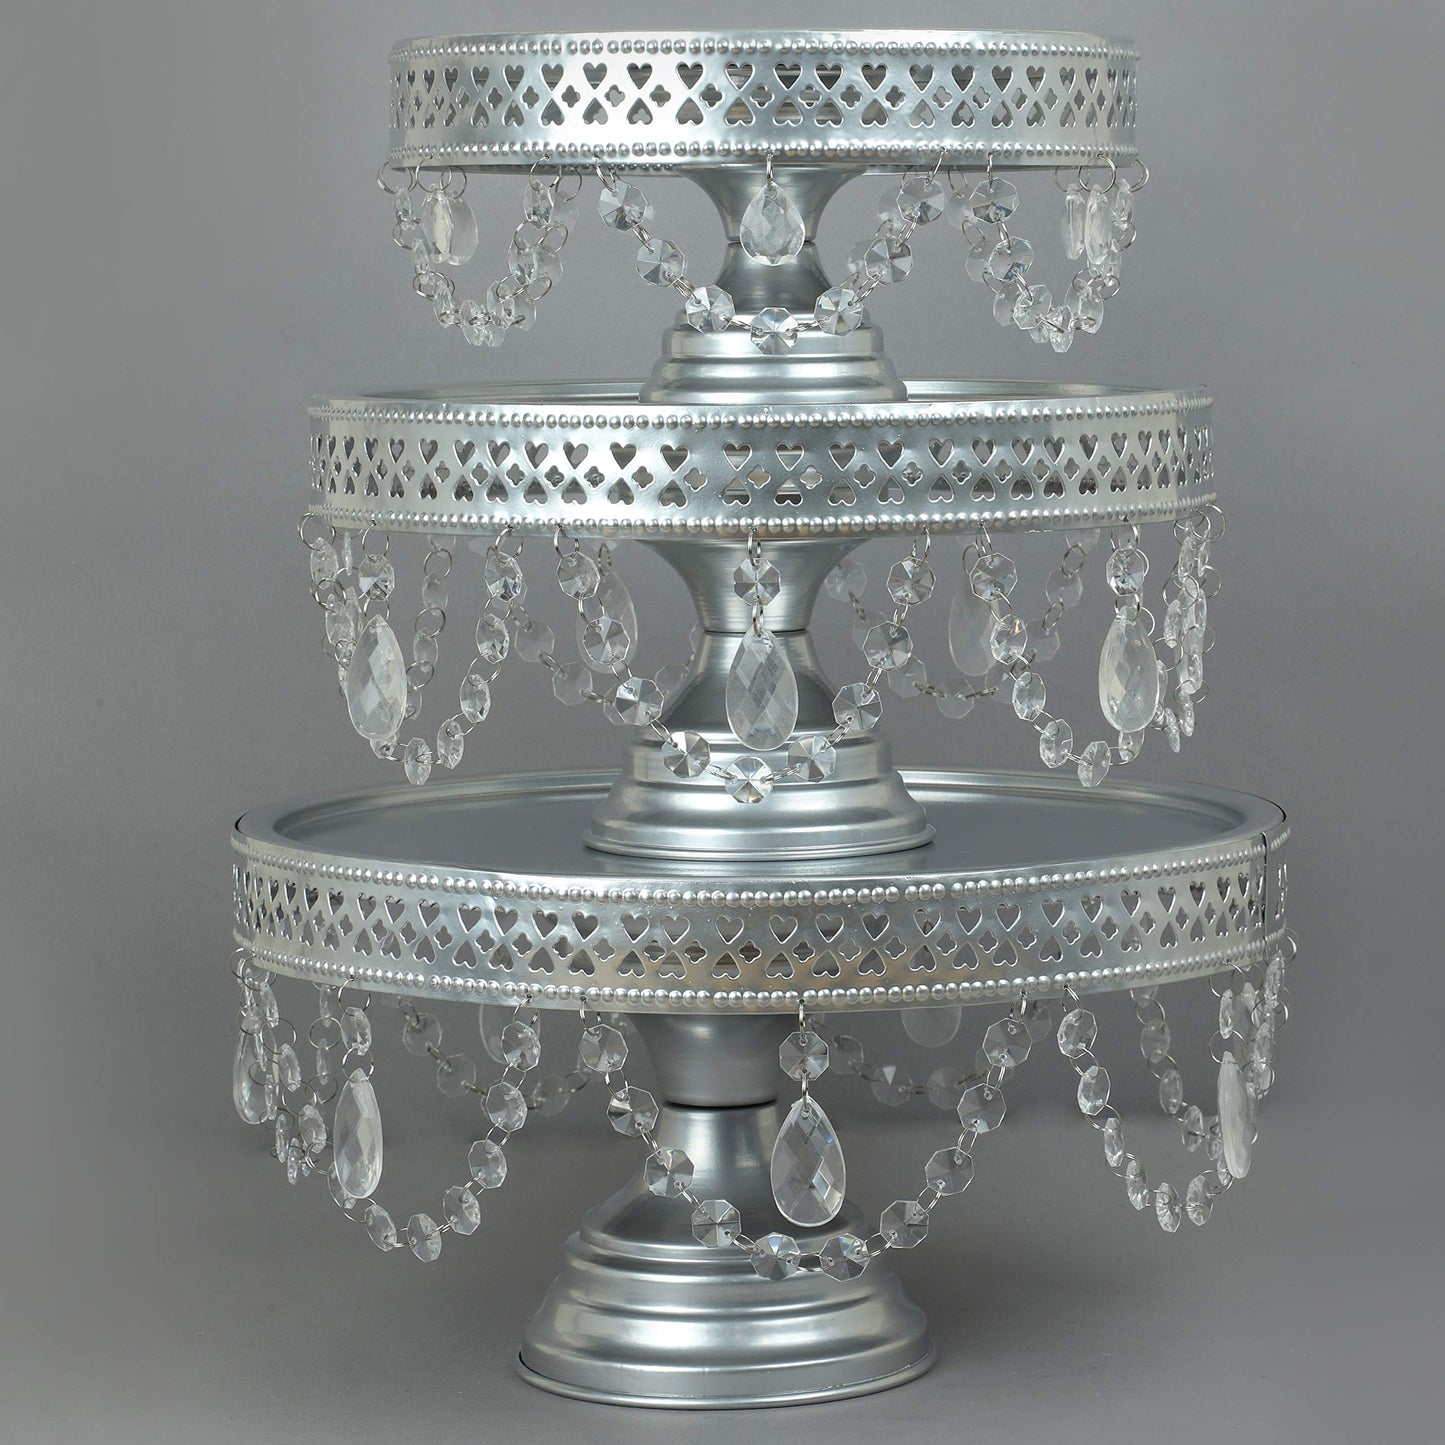 GiftBay Creations - Cake Stand Pedestal Round Strong Metal with Clear Hanging Crystals Set/3 (9-Inch, 11-Inch, 13-Inch, Silver)